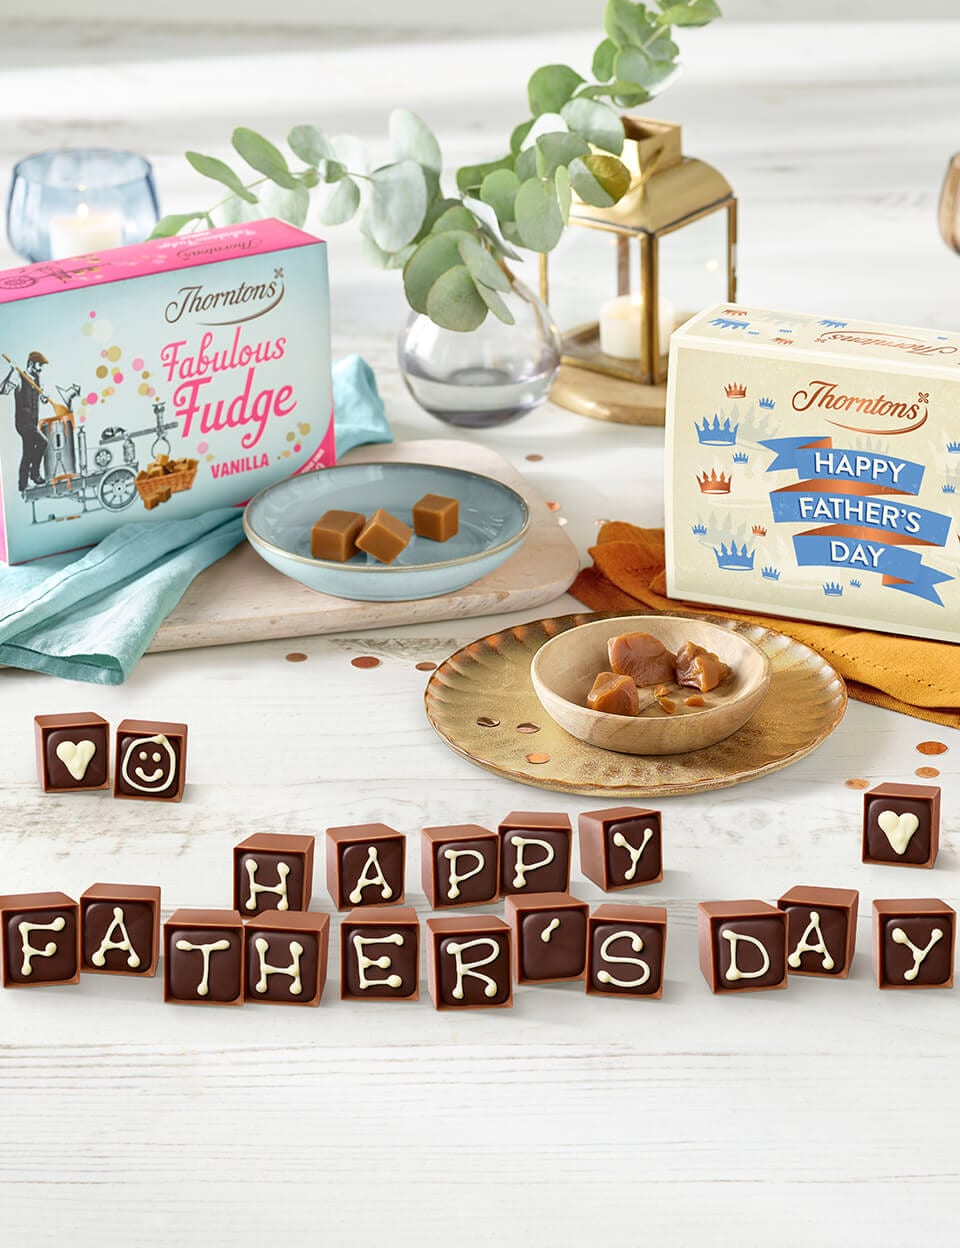 Thorntons Fathers Day Toffee Fugde and Sleeve